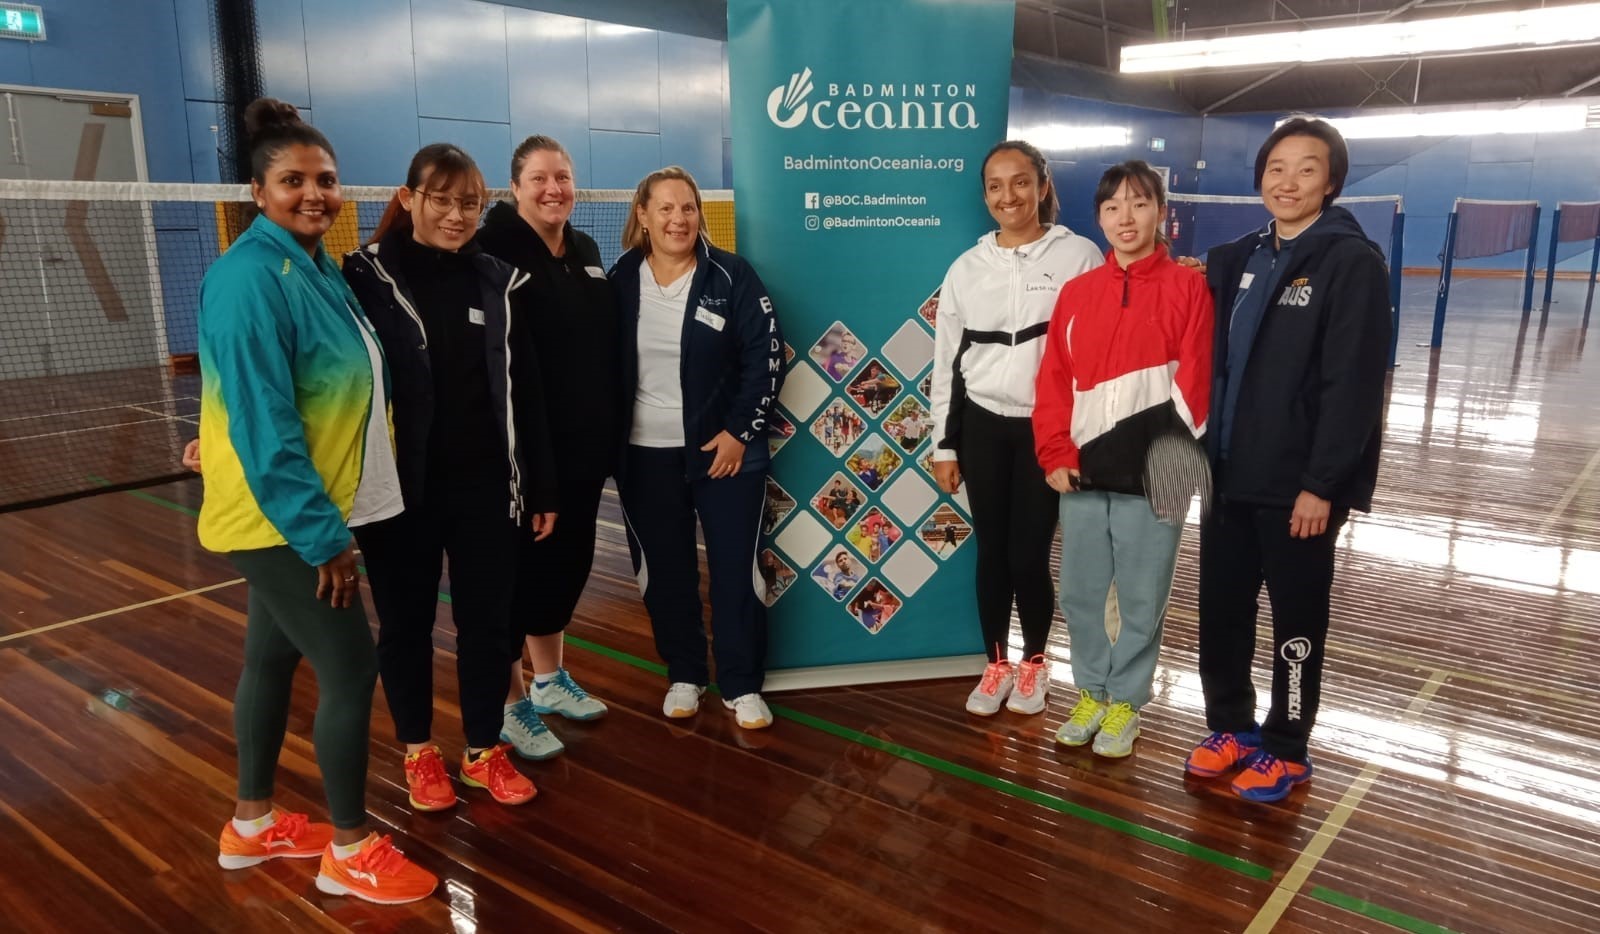 BWF Level 1 coaching course smashes Gender Equity targets in Melbourne